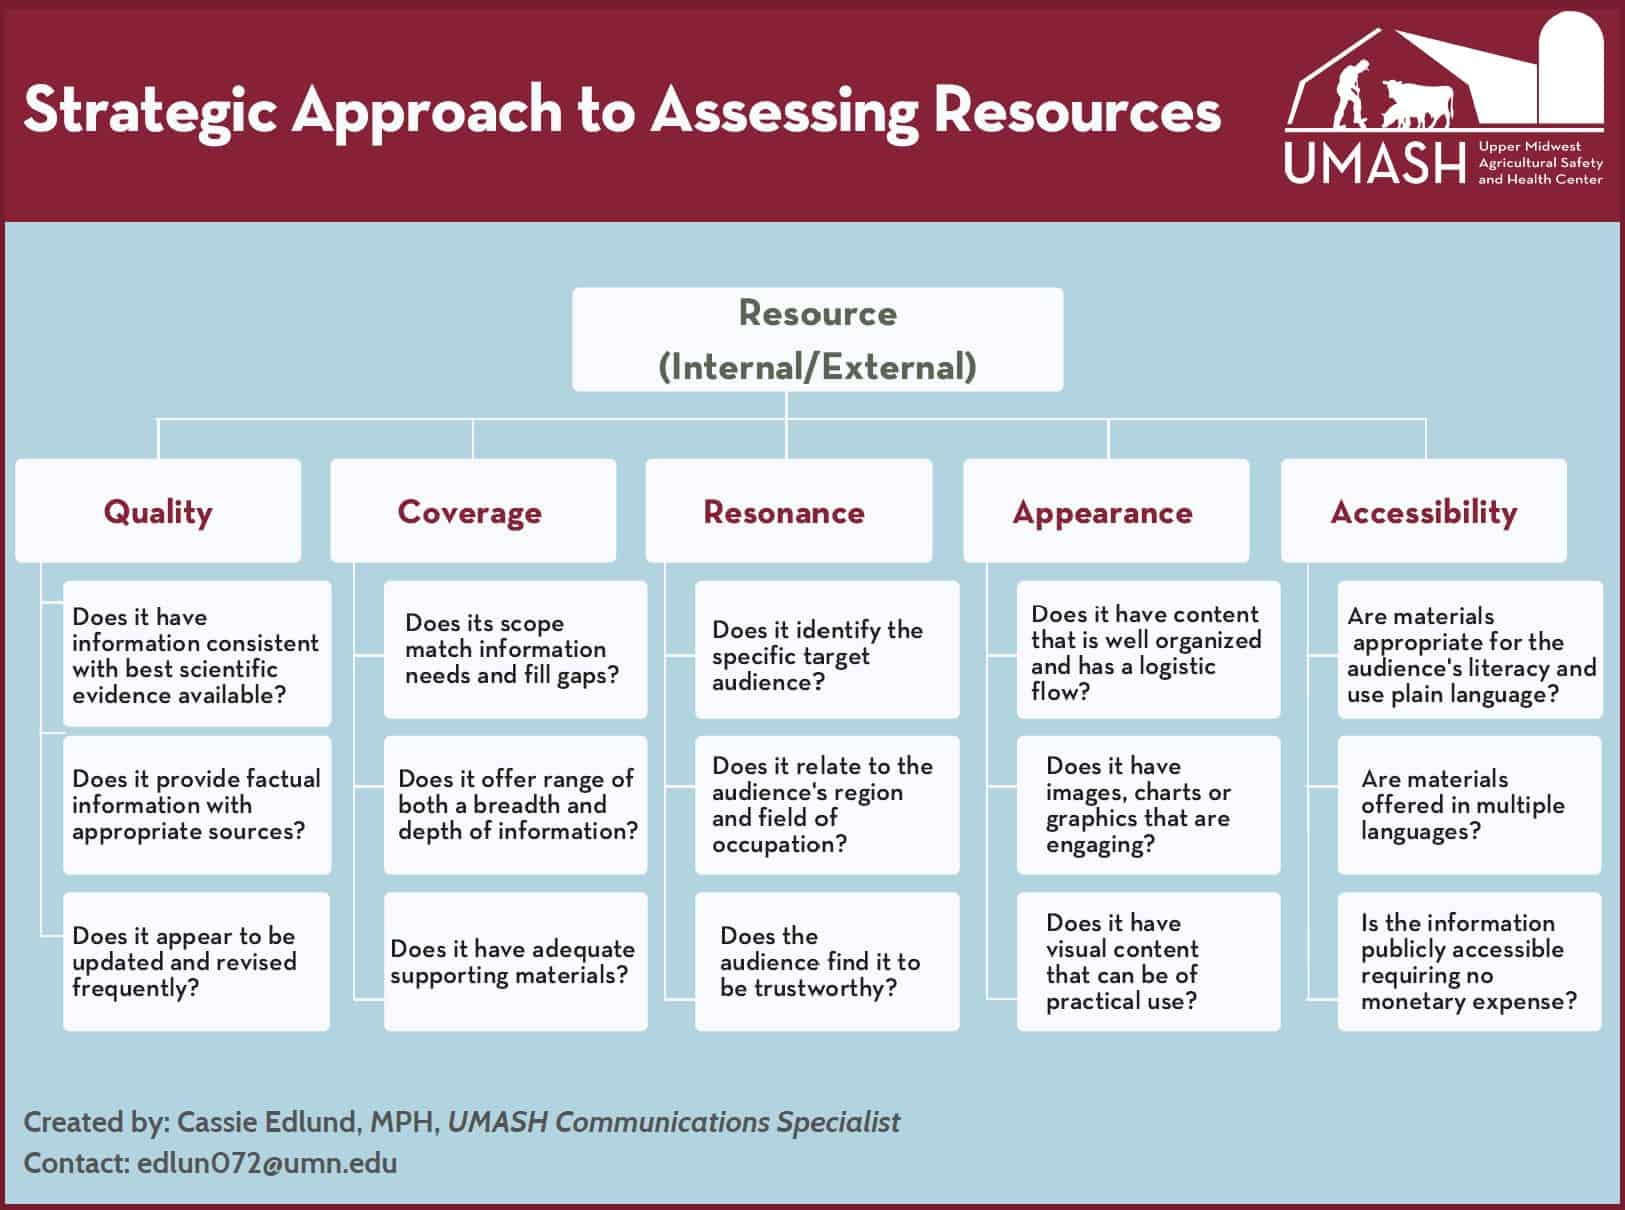 Strategic Approach to Assessing Resources